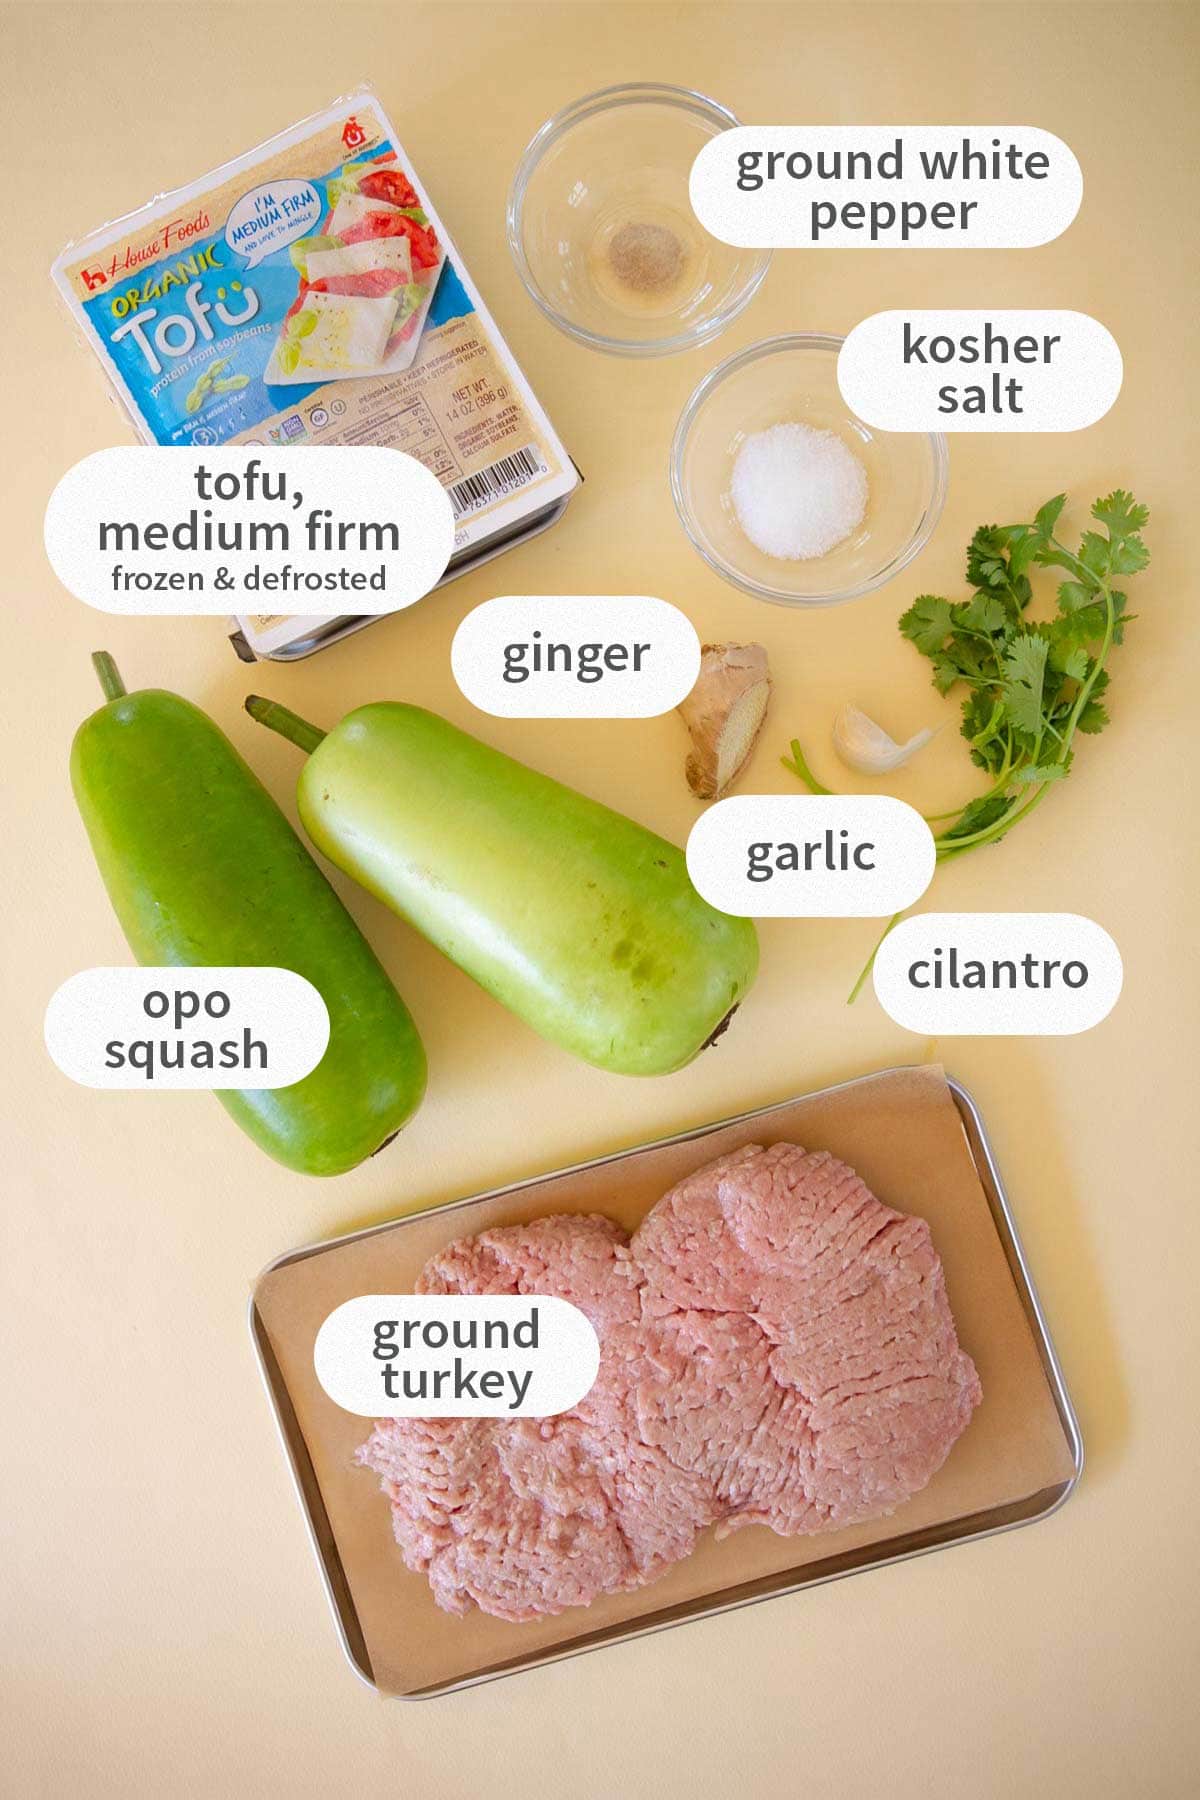 Labeled ingredients for opo squash soup over a light yellow background.